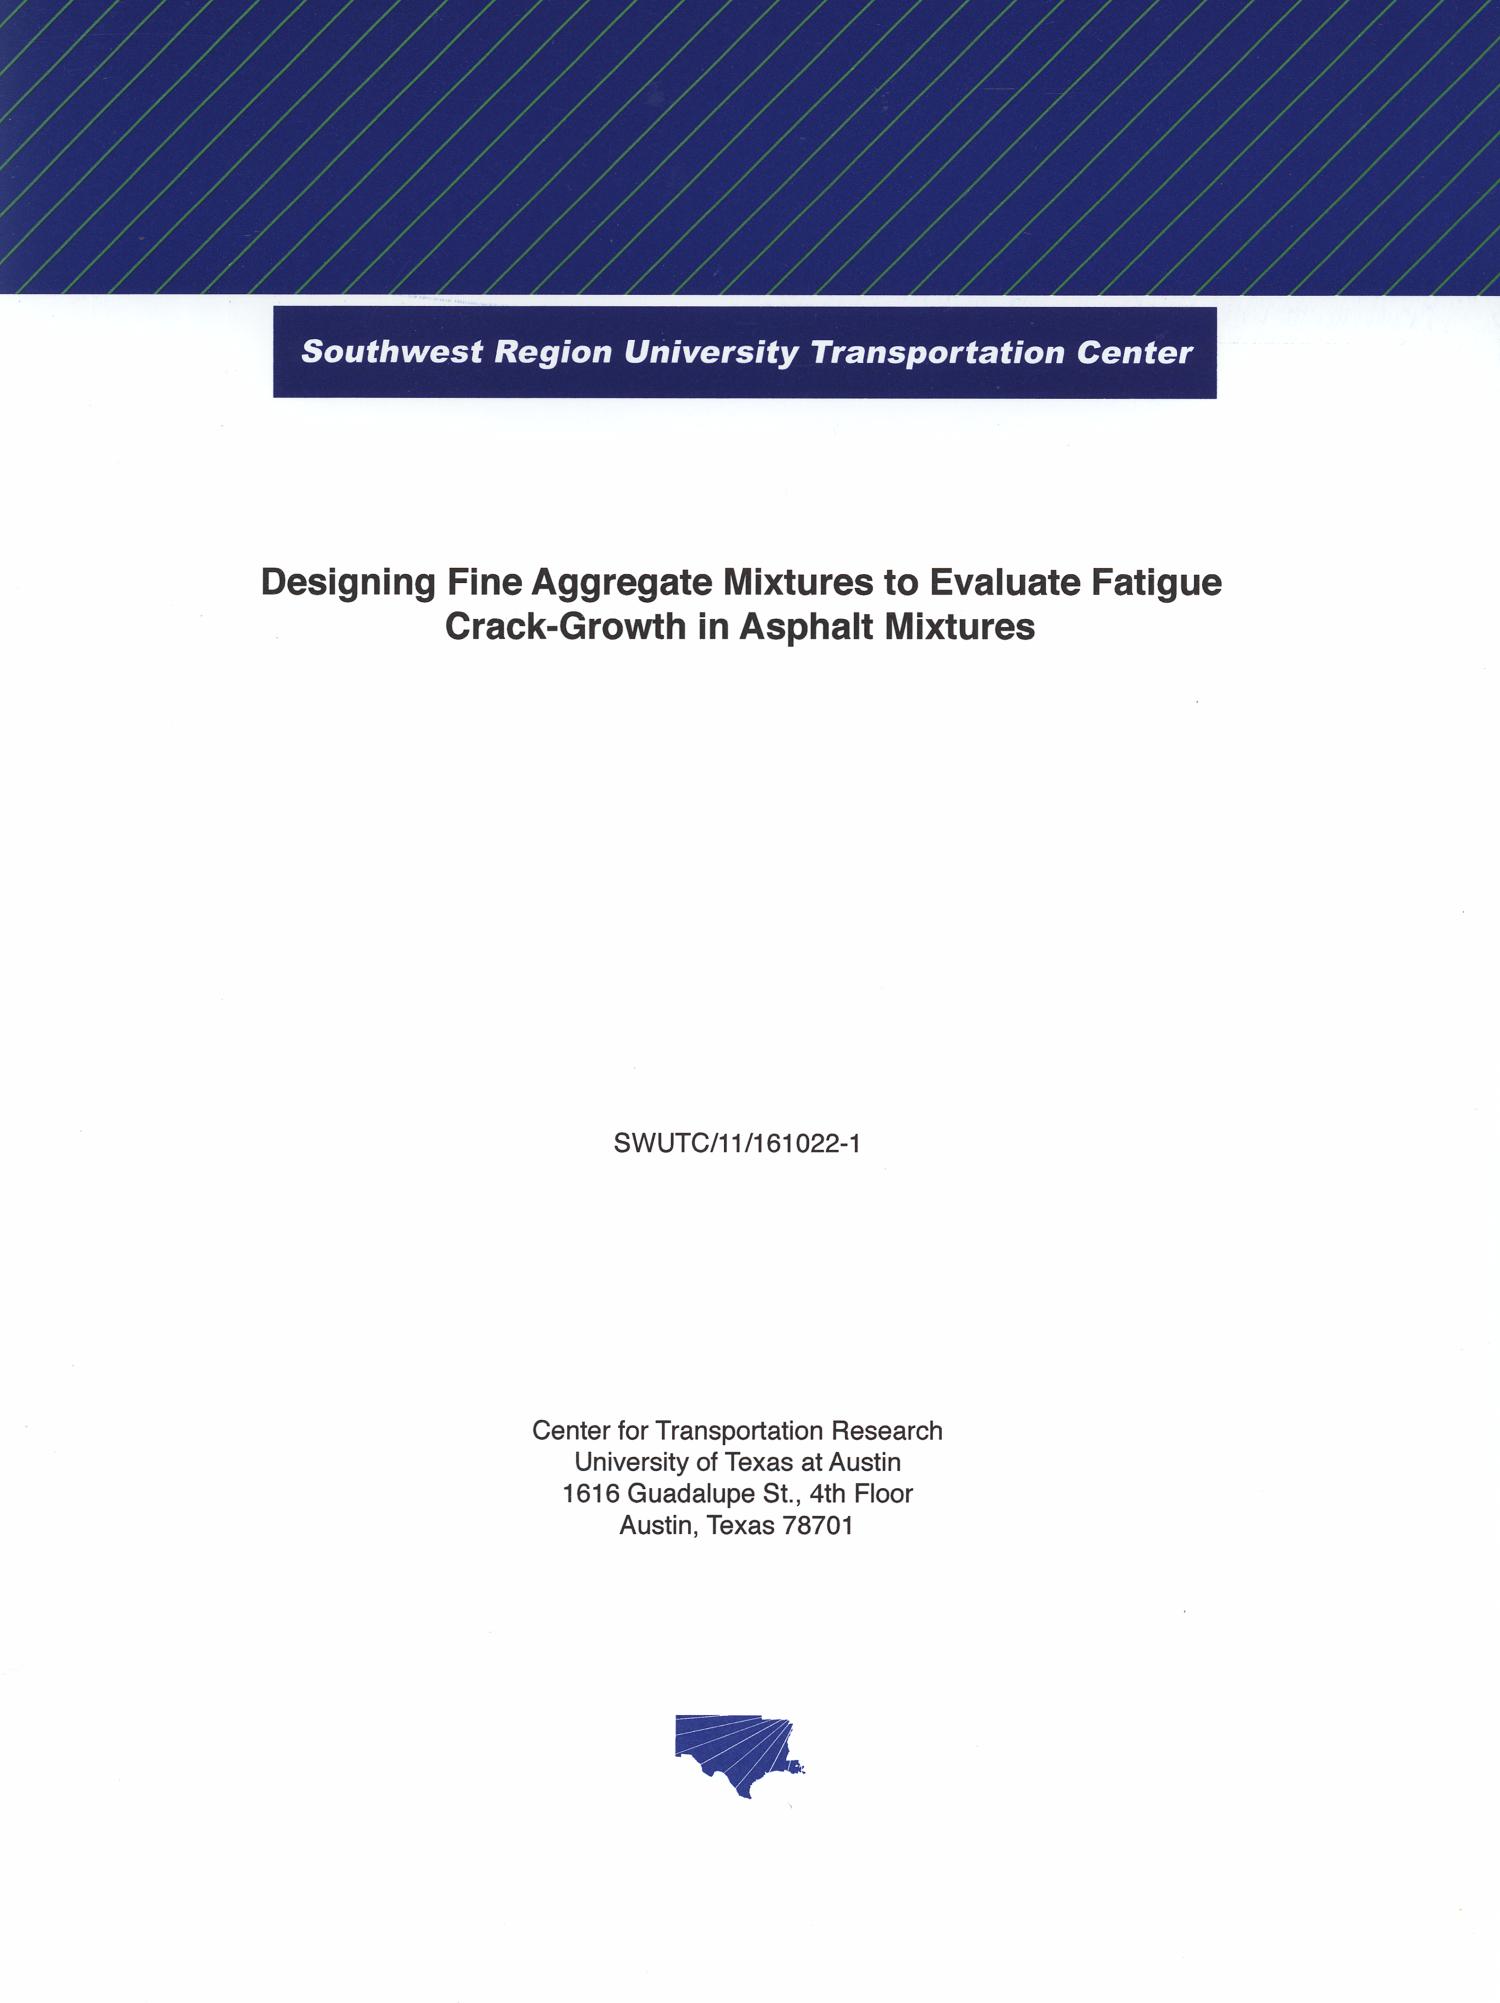 Designing Fine Aggregate Mixtures to evaluate fatigue crack growth in asphalt mixtures
                                                
                                                    Front Cover
                                                